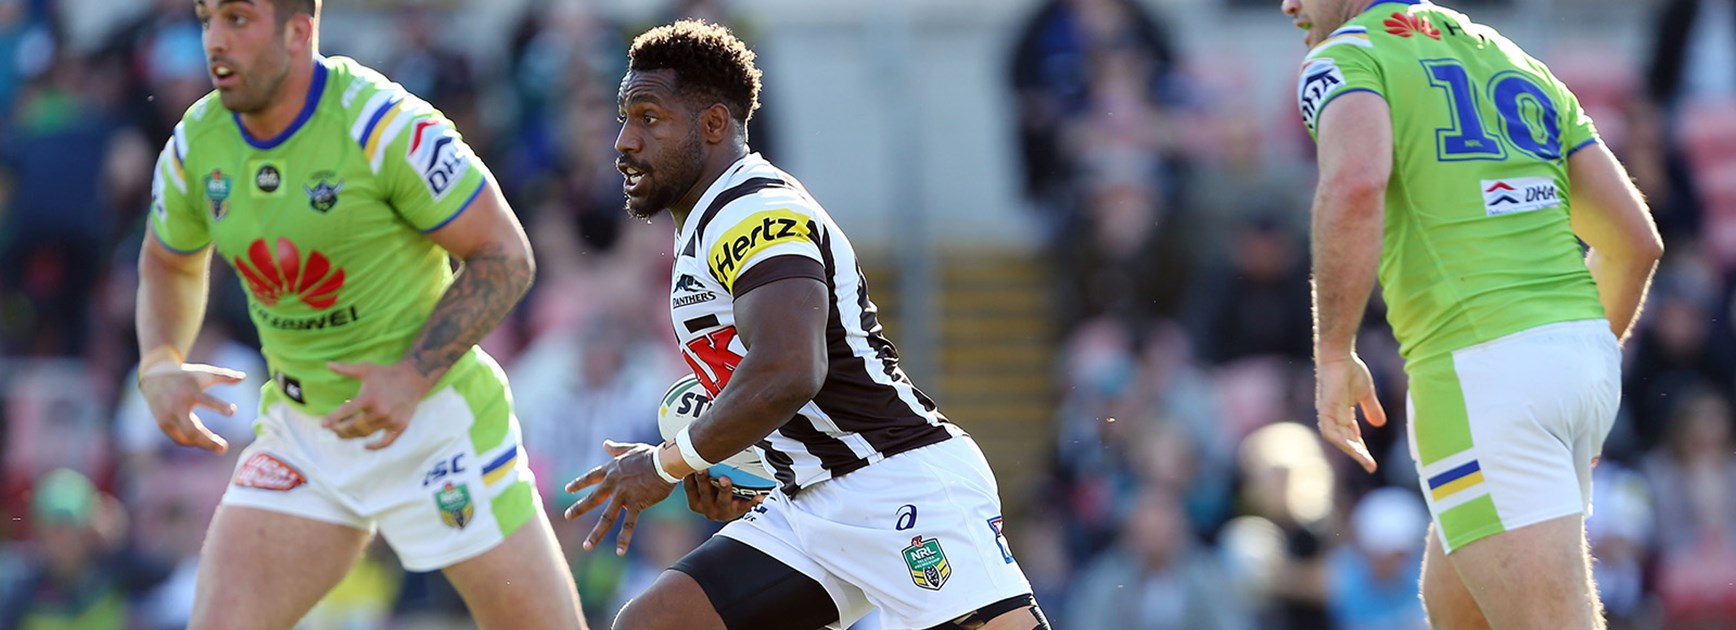 Penrith hooker James Segeyaro makes a break against Canberra in Round 20 of the Telstra Premiership.